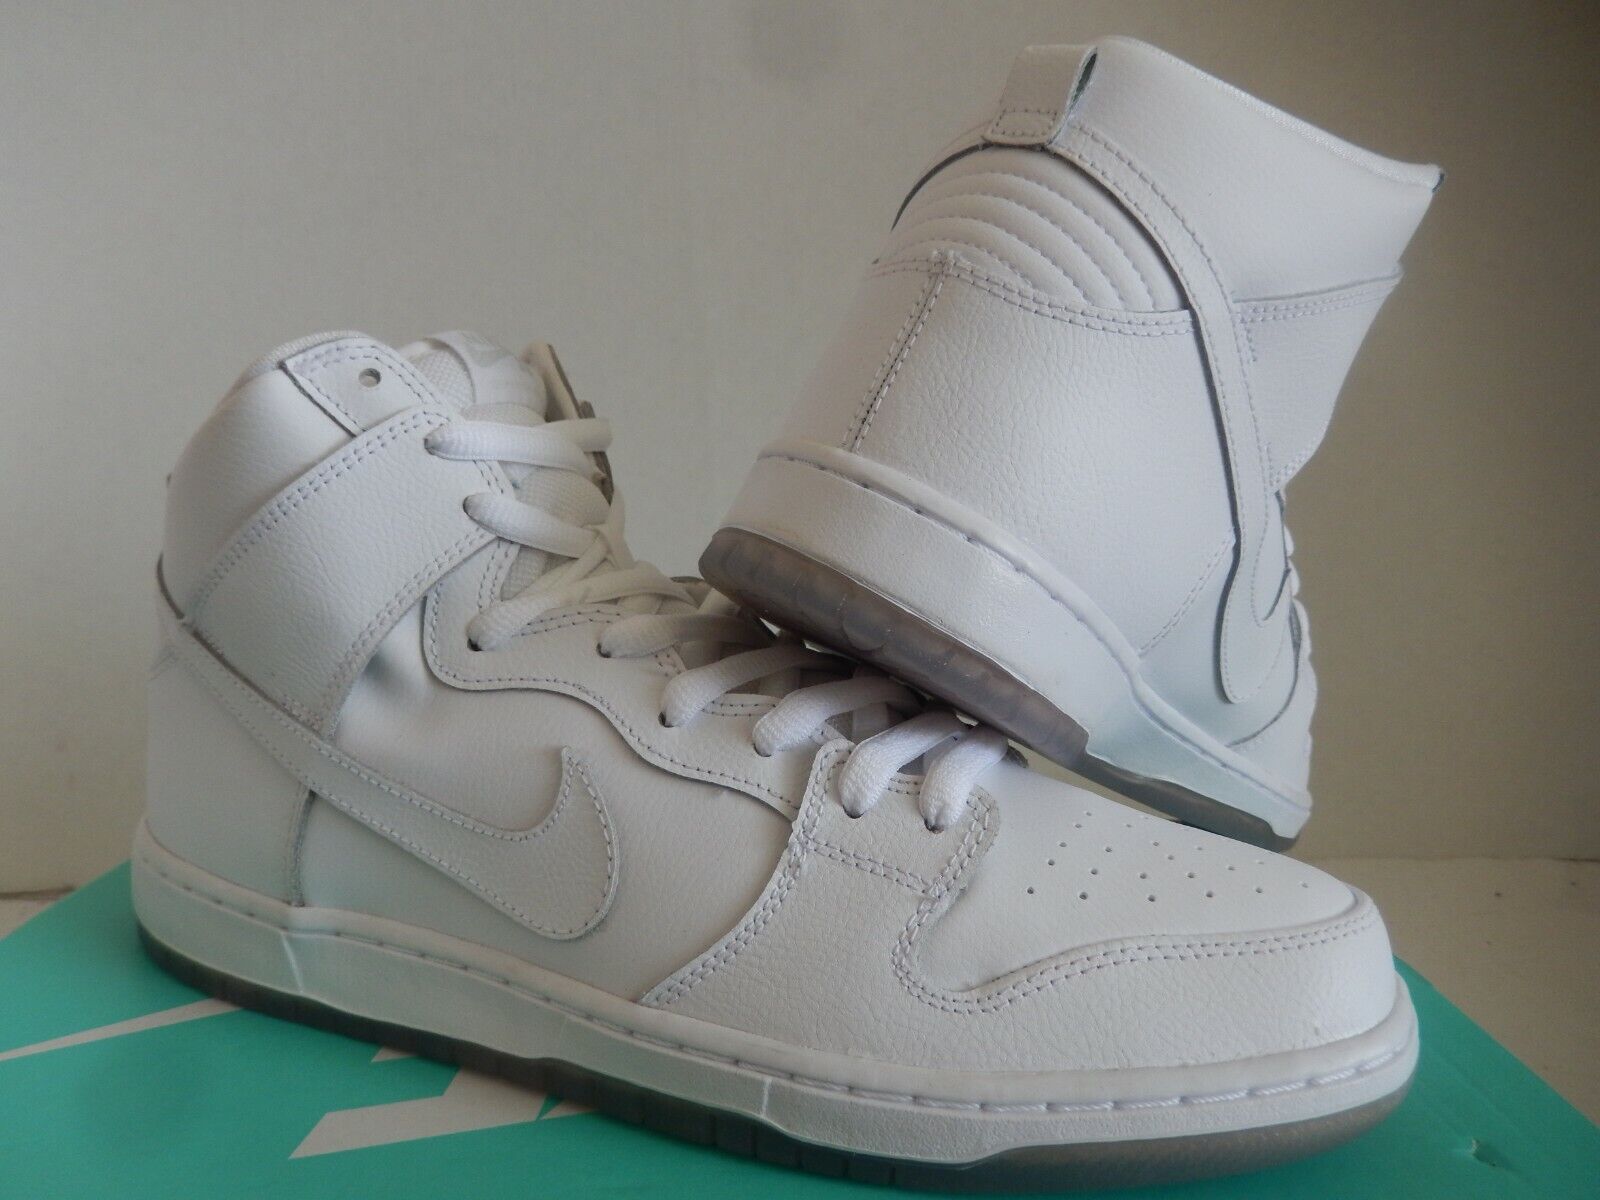 Size 13 - Nike SB Dunk High Pro White Ice for sale online | eBay